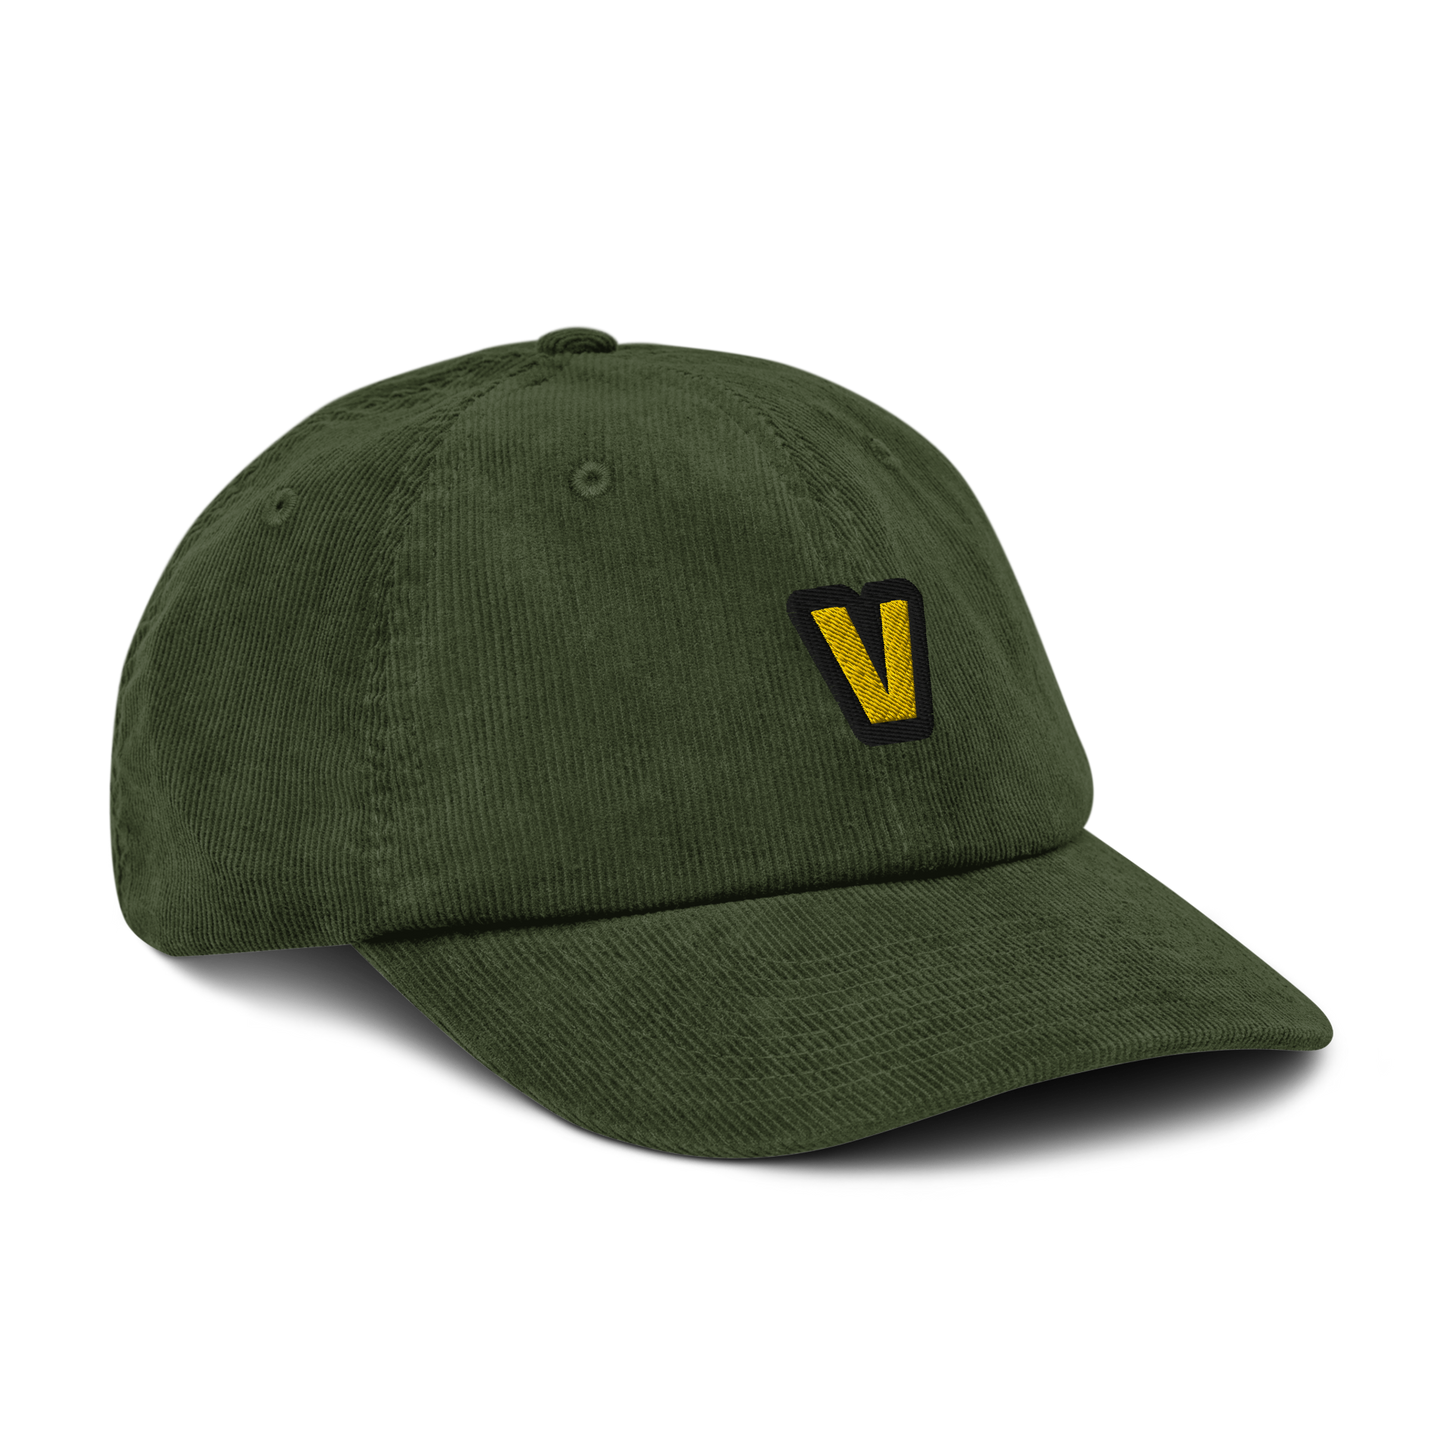 V - The letter collection - Corduroy hat